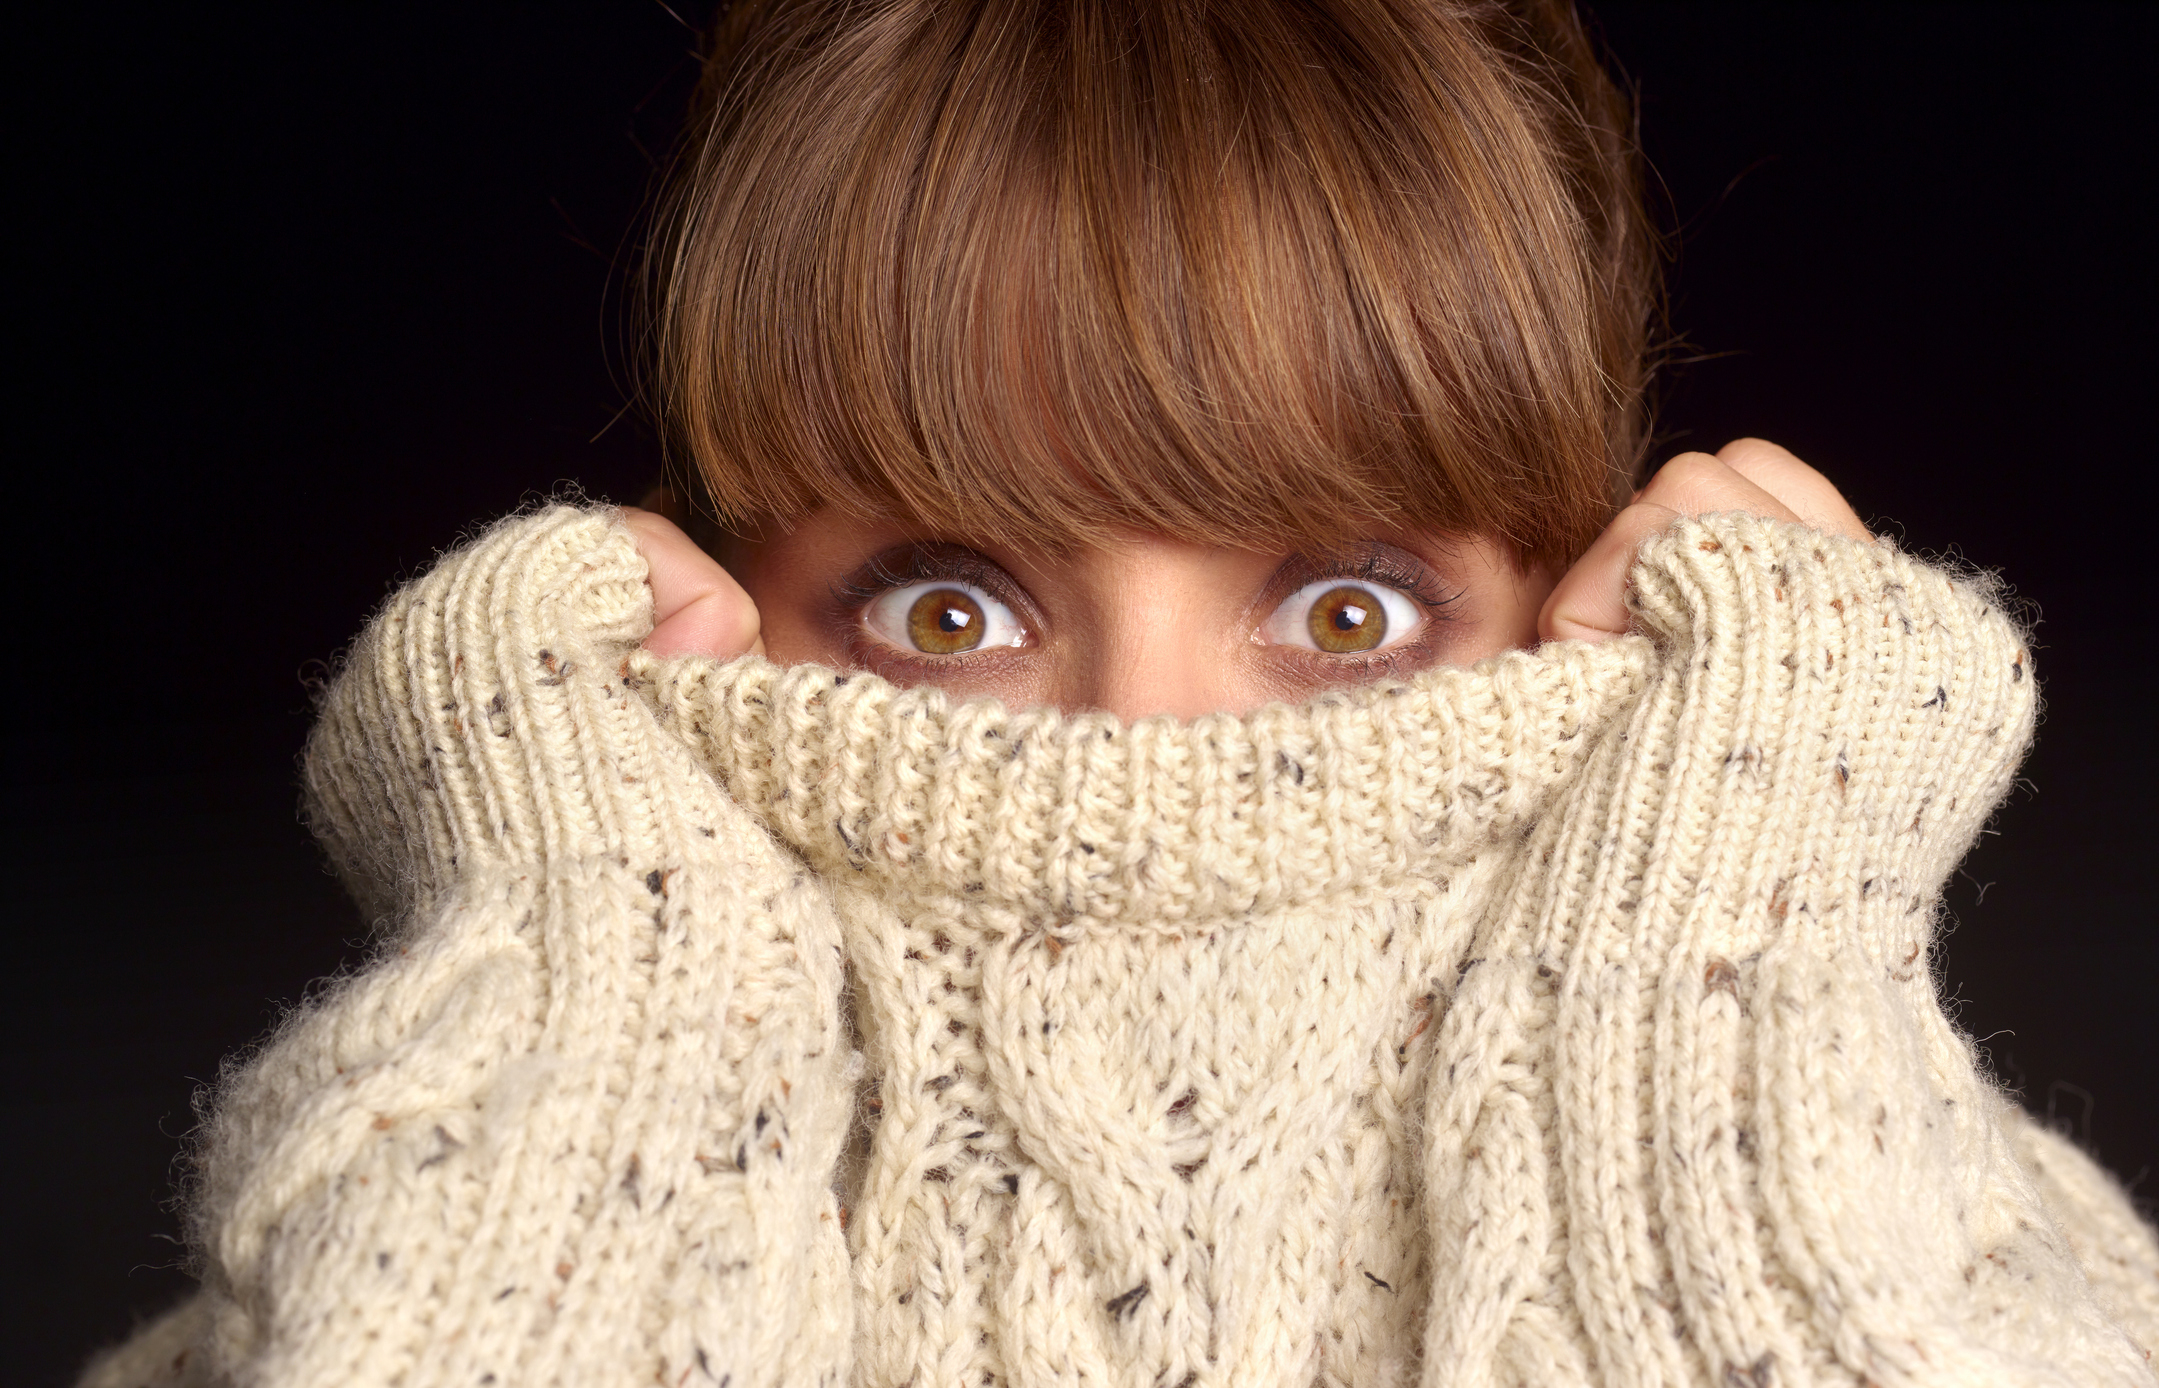 A woman partially covers her face with a cozy, knit sweater, showing only her wide eyes and bangs